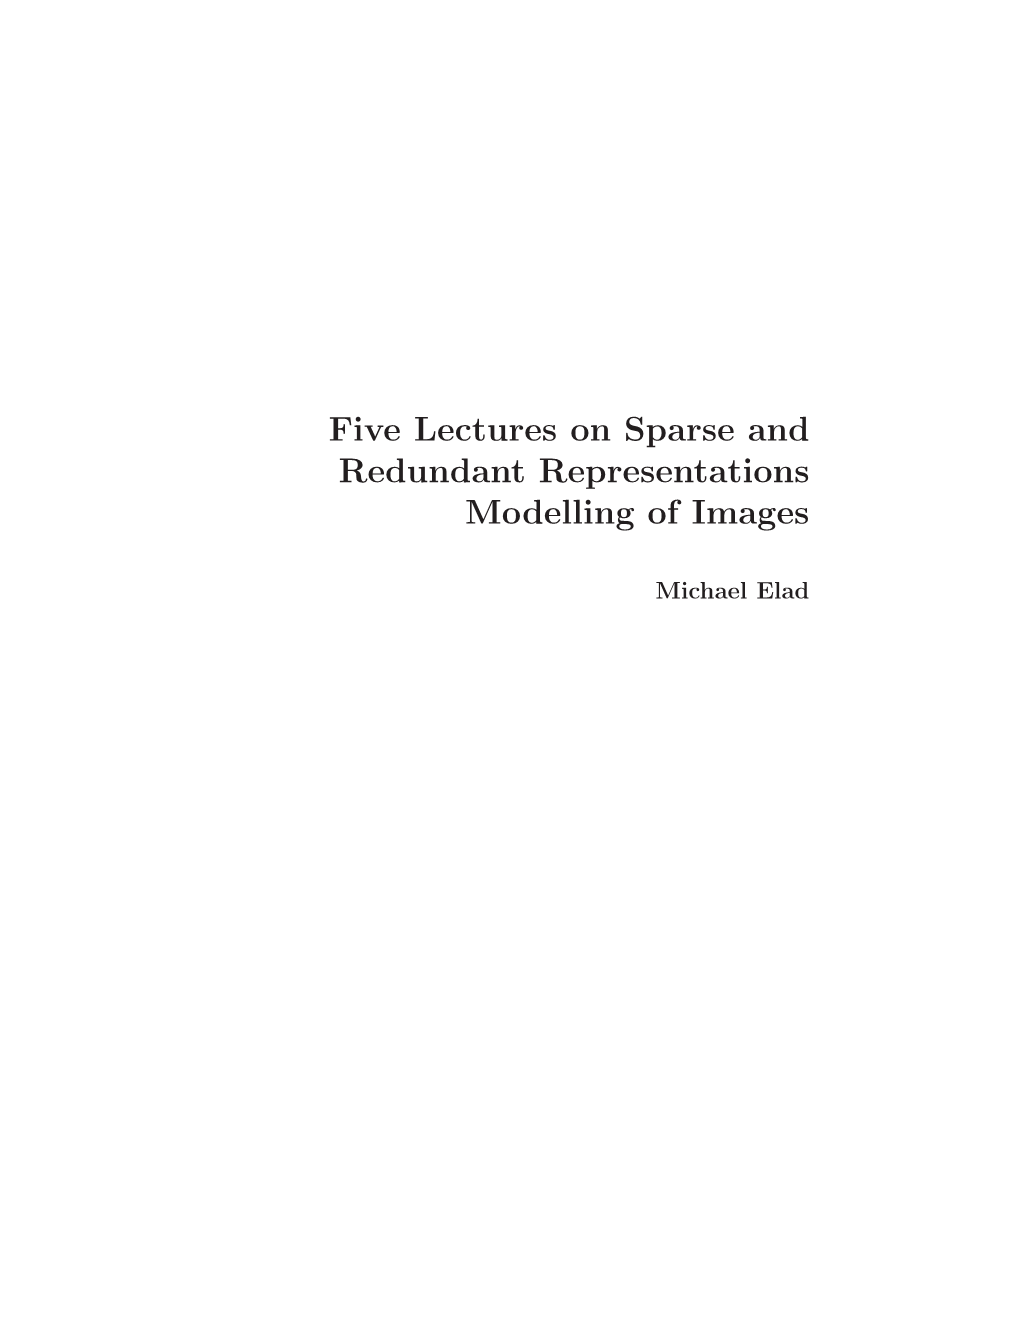 Five Lectures on Sparse and Redundant Representations Modelling of Images